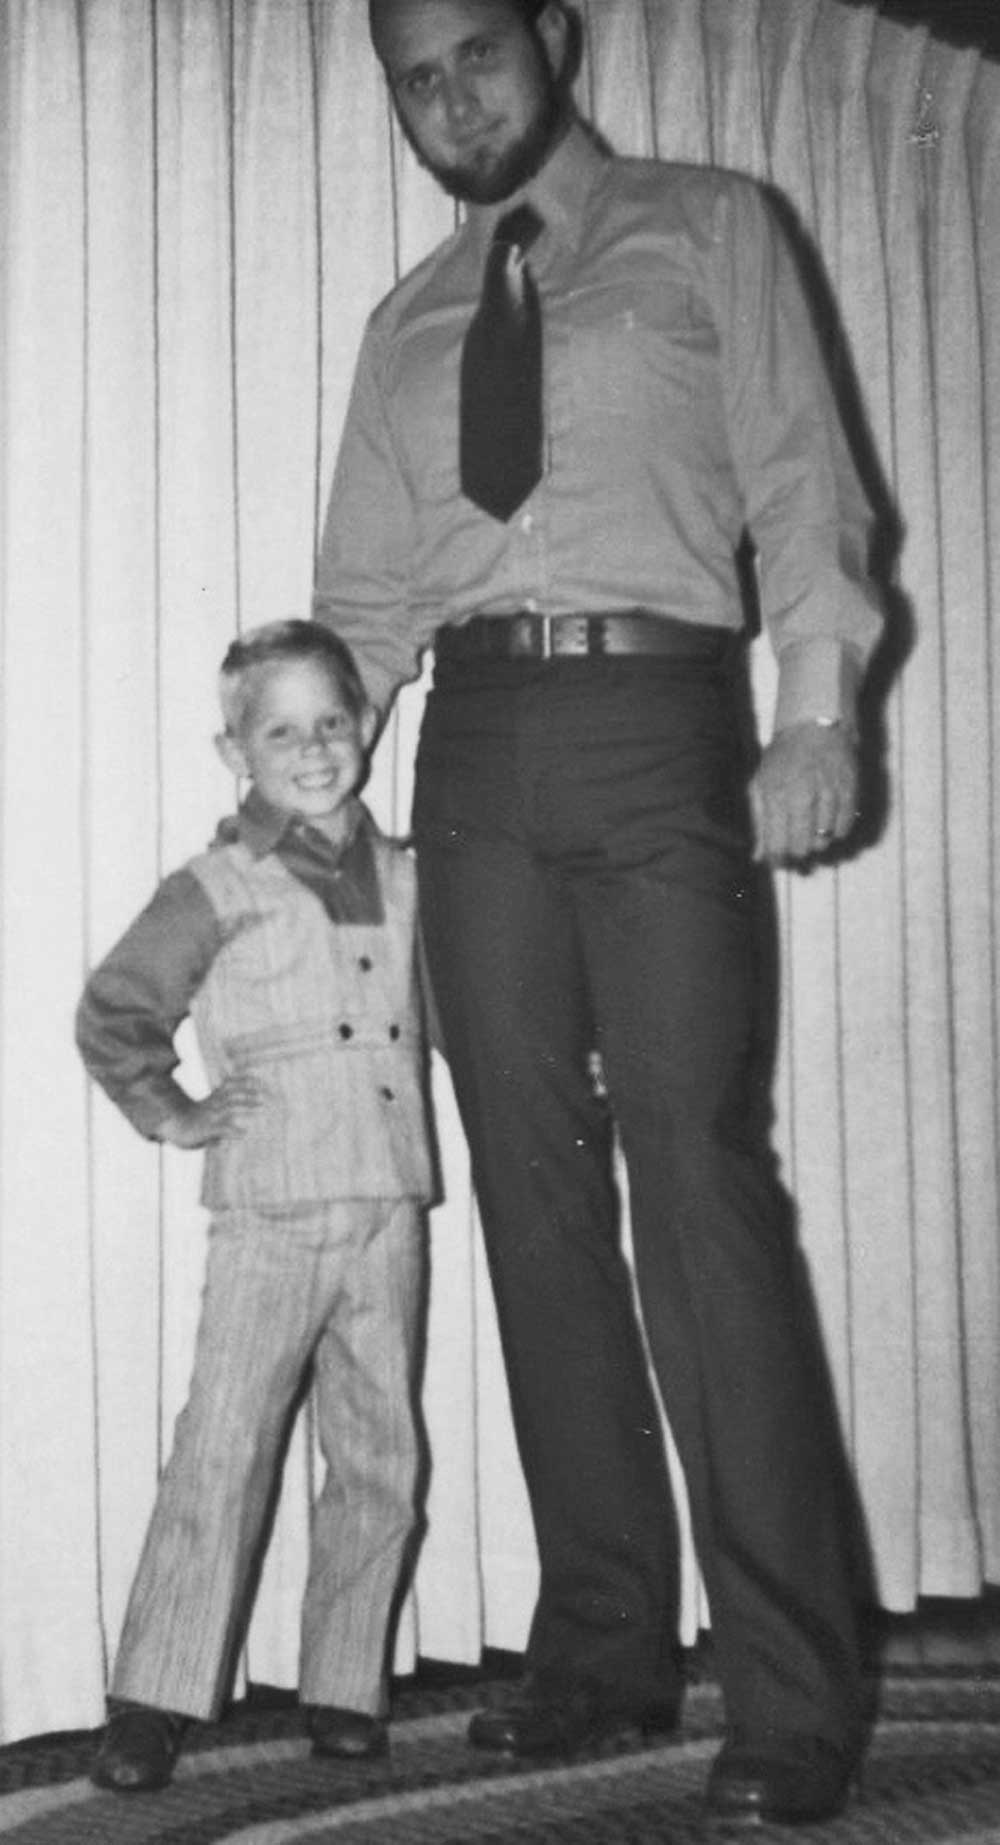 Old black and white photo of Brian as a little boy wearing a dress shirt and pants, and standing next to his dad, who is wearing pants with a button-up shirt and tie.